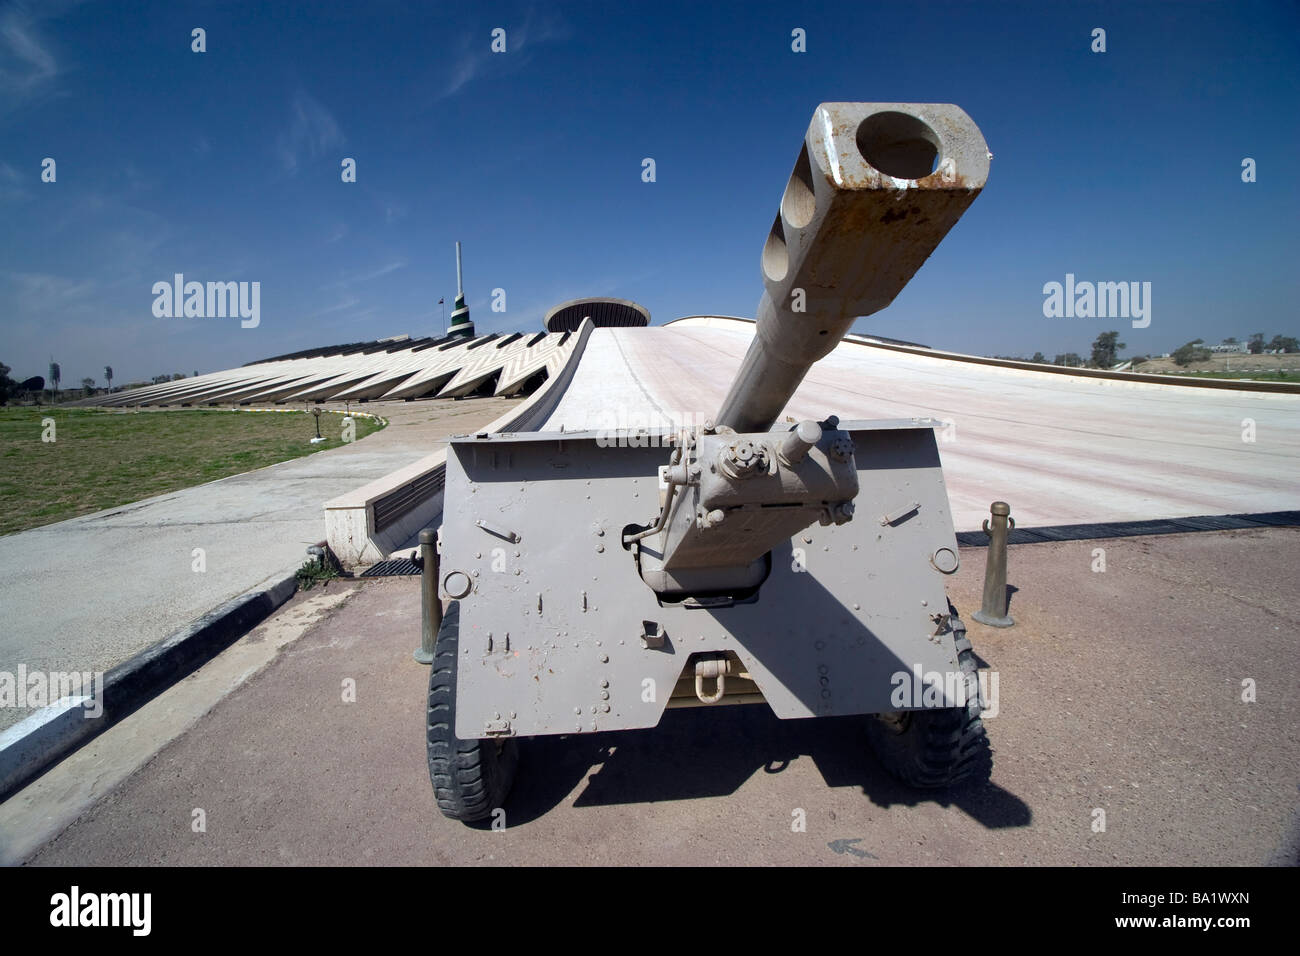 Baghdad, Iraq - An Iraqi Howitzer sits at the entrance of the Monument to the Unknown Soldier. Stock Photo